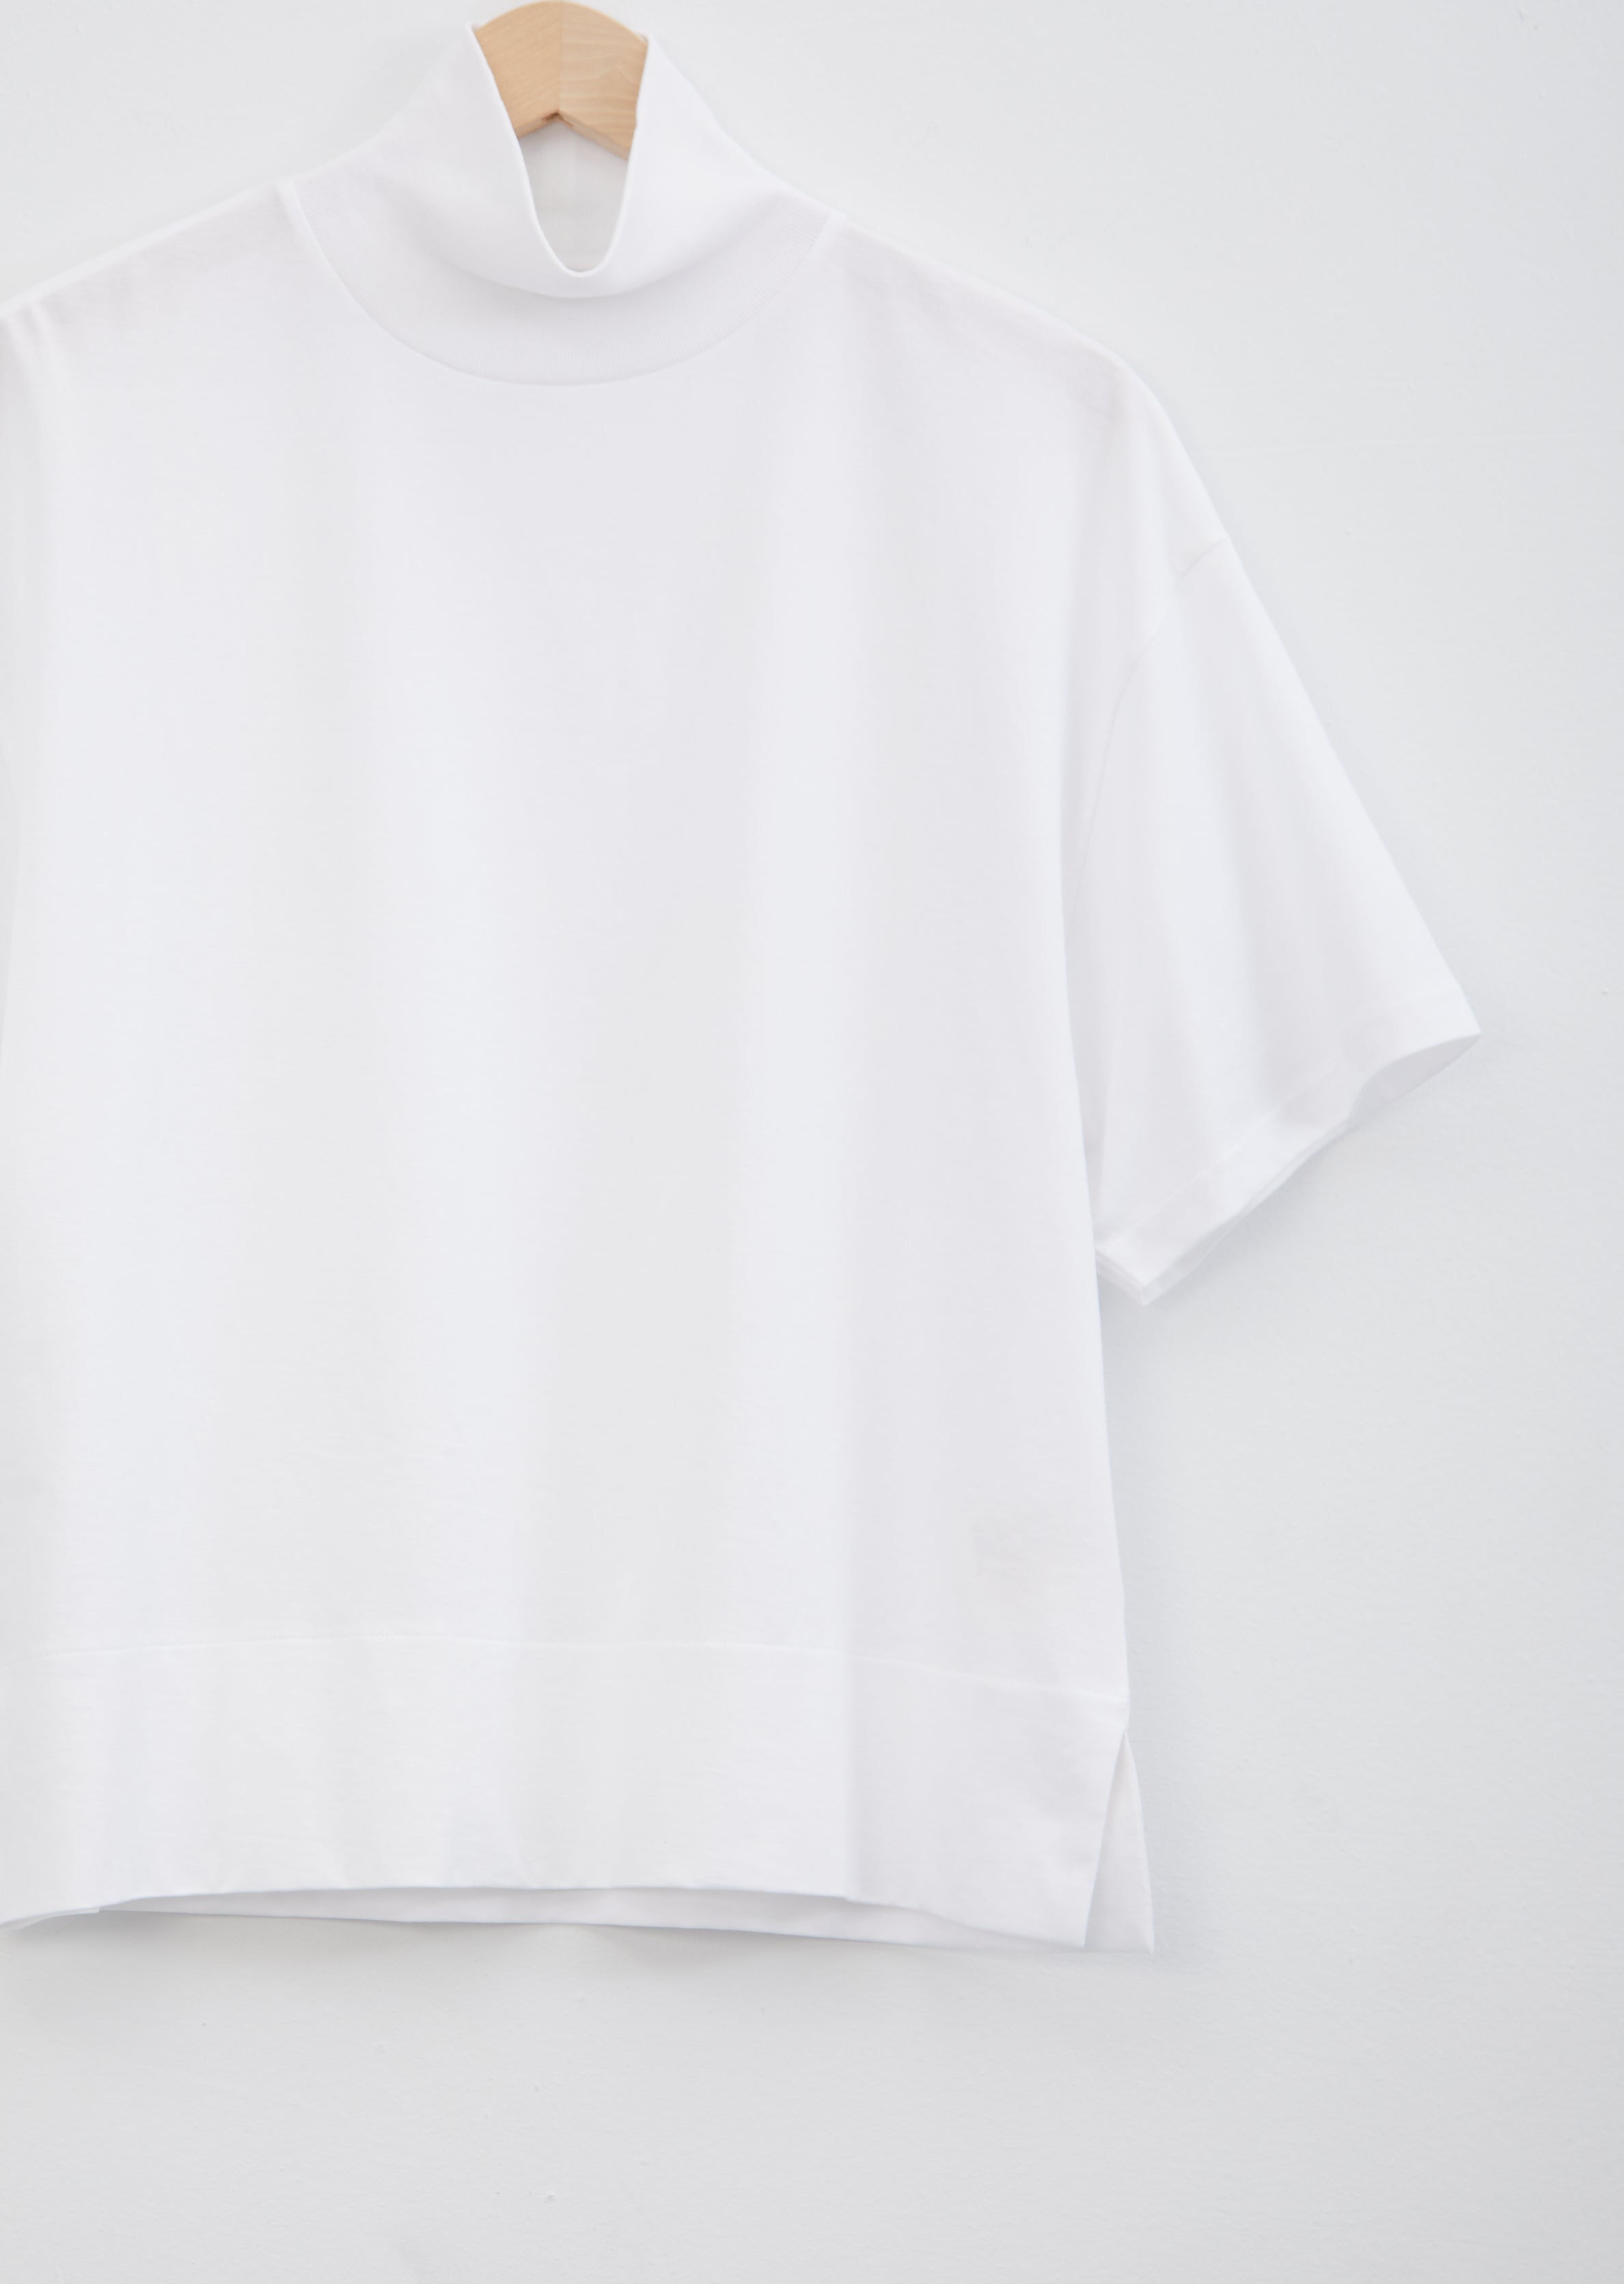 UNFILTERED : PREMIUM T-SHIRT : WHITE – Fully Deleted